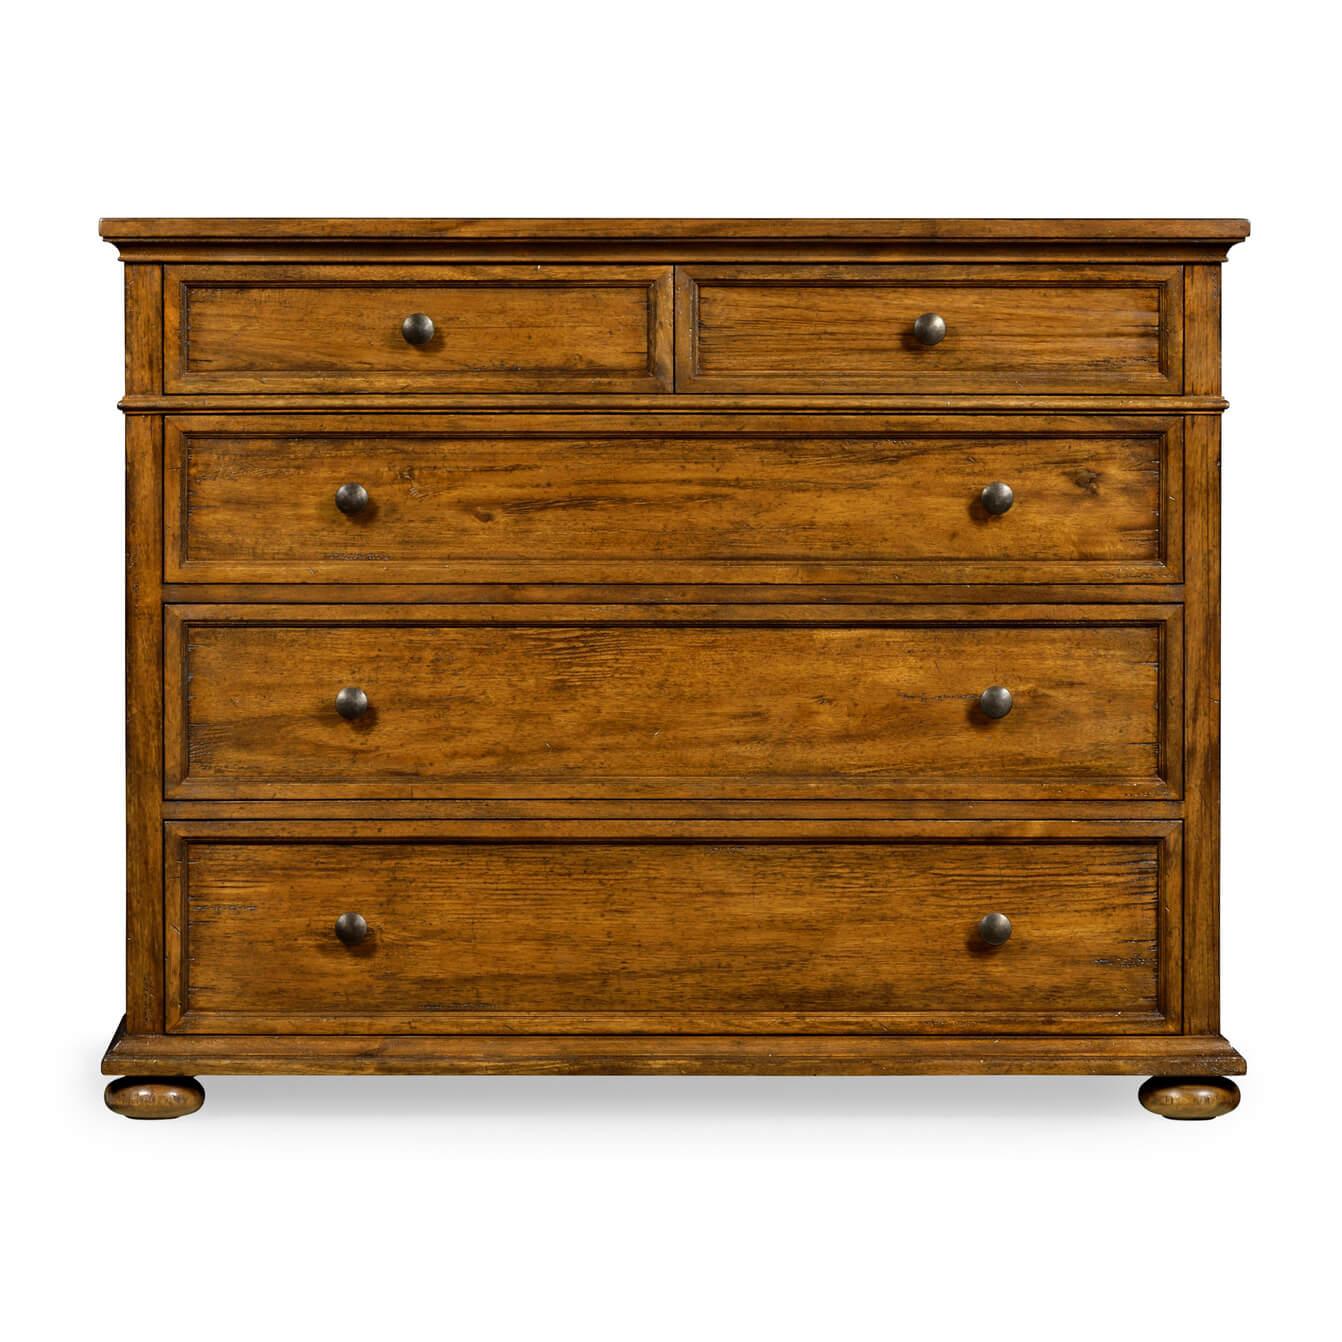 Large English Country walnut chest of drawers with two small top drawers and three large drawers, brass handles, and bunn feet.

Dimensions: 47.25